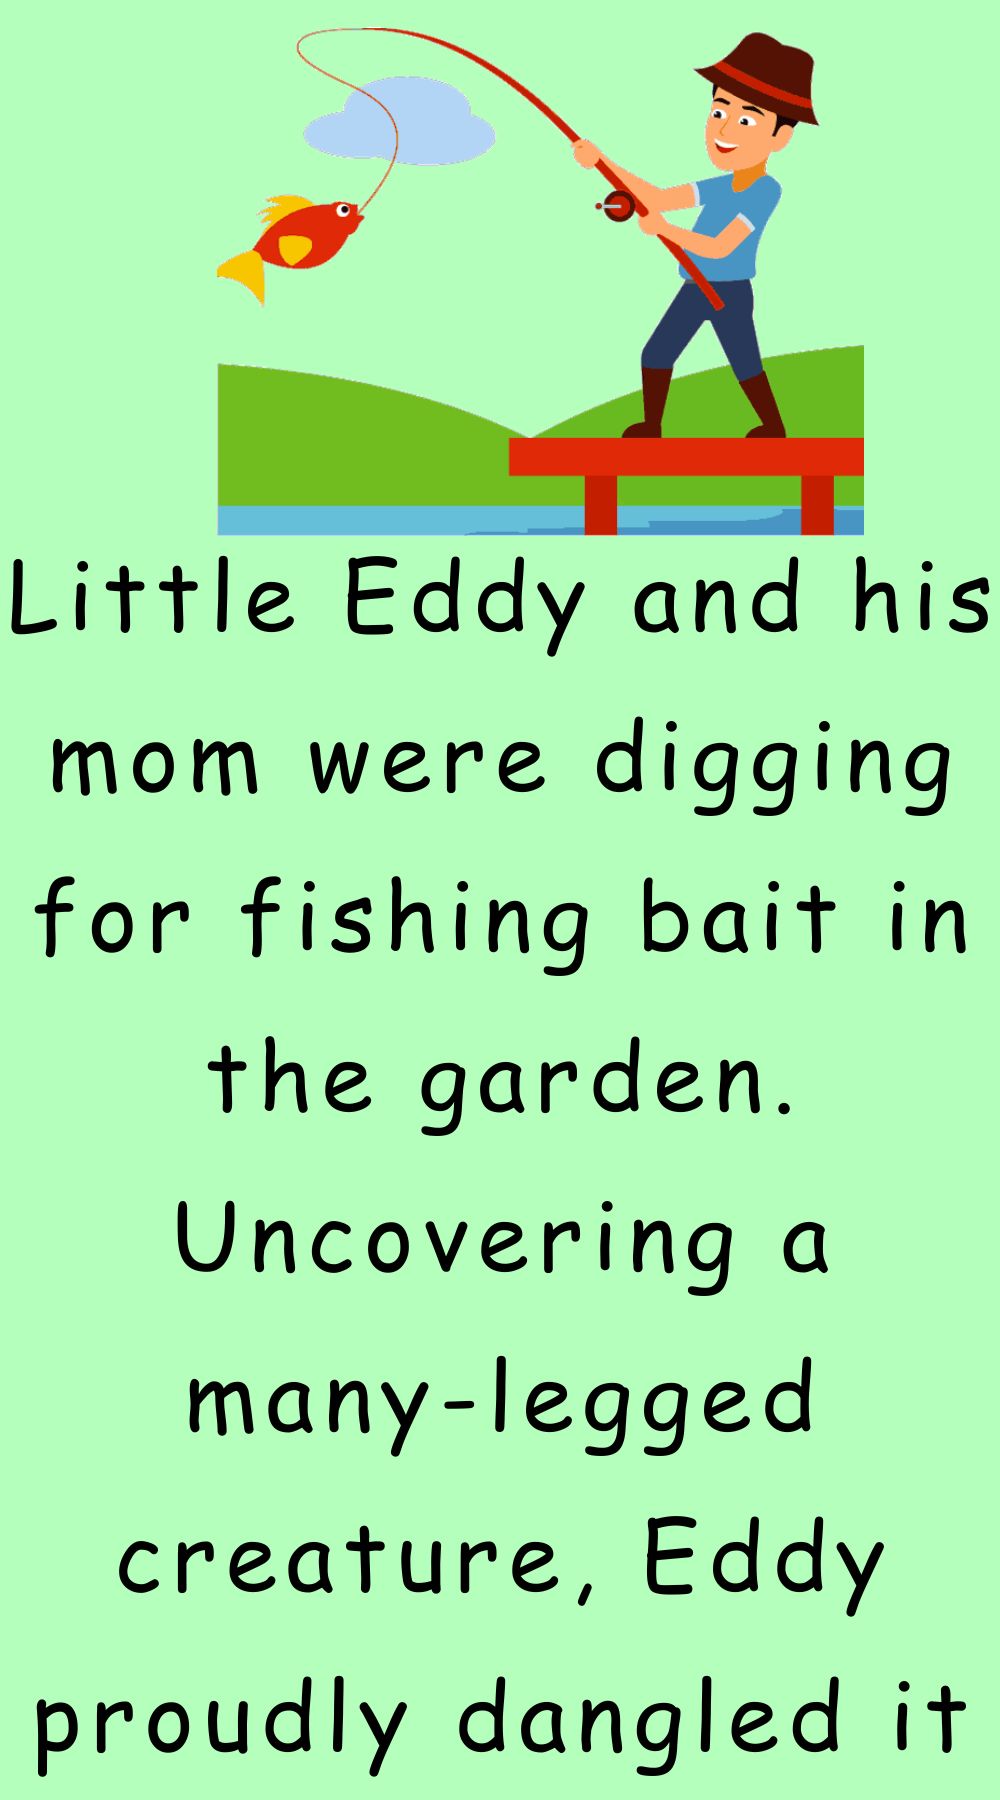 Little Eddy and his mom were digging for fishing 